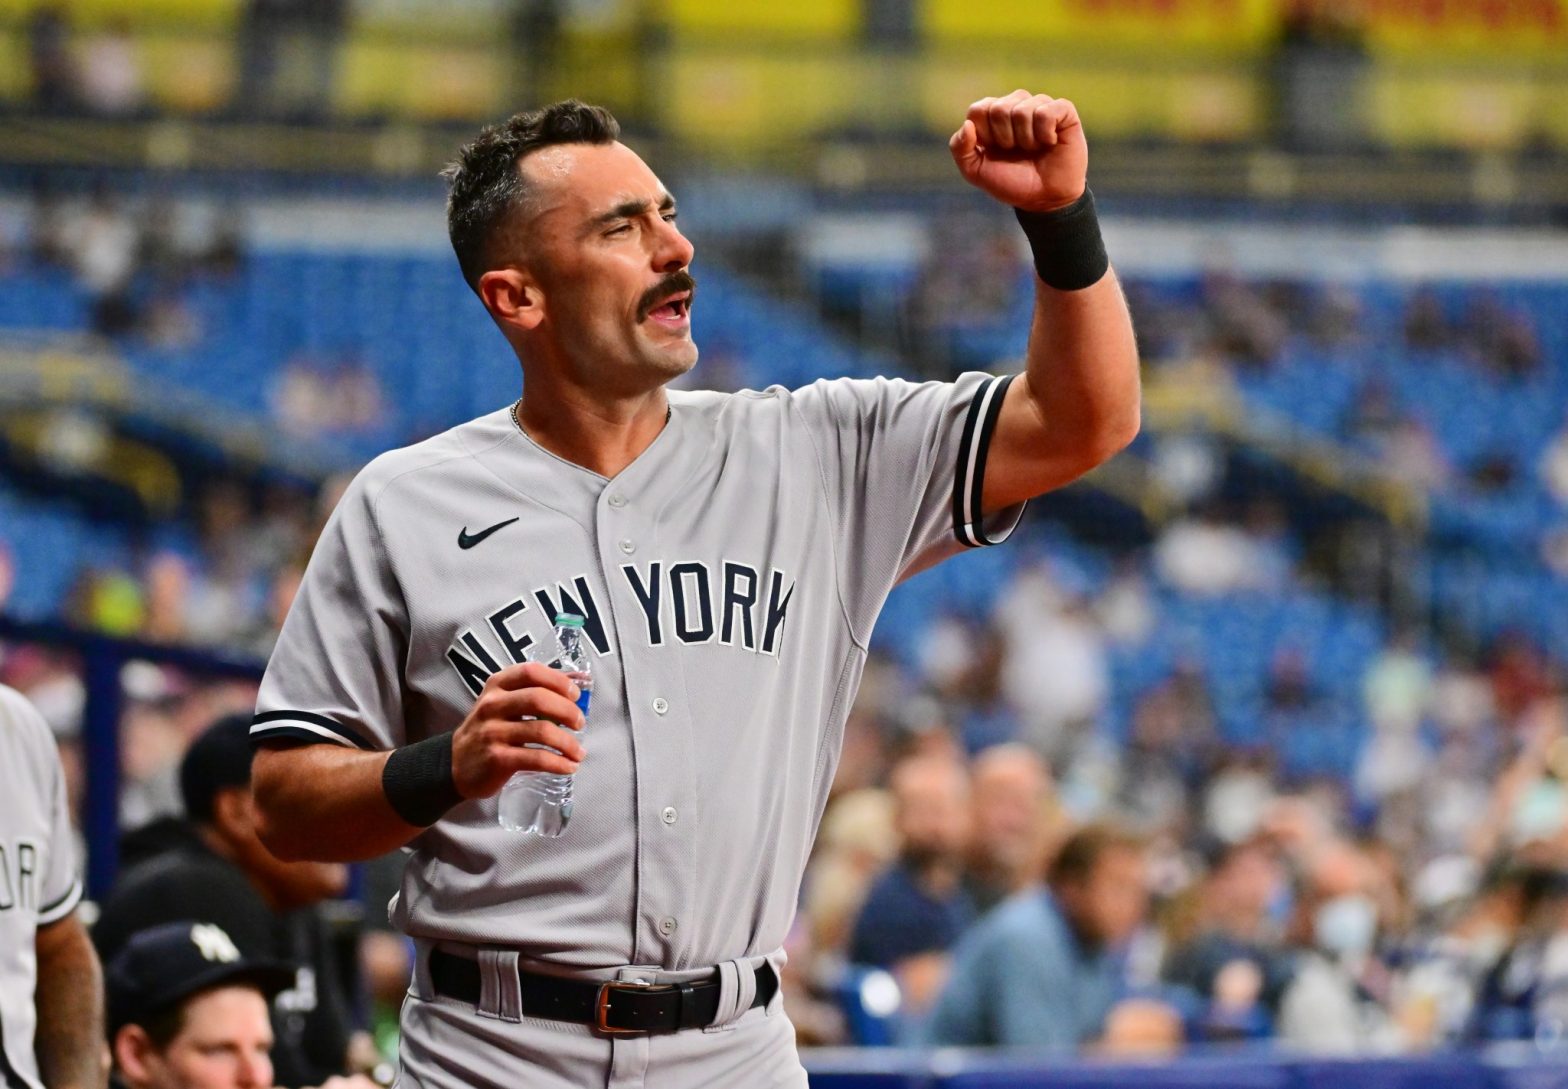 What did San Diego Padres’ Matt Carpenter say about painful ending to Yankees tenure?